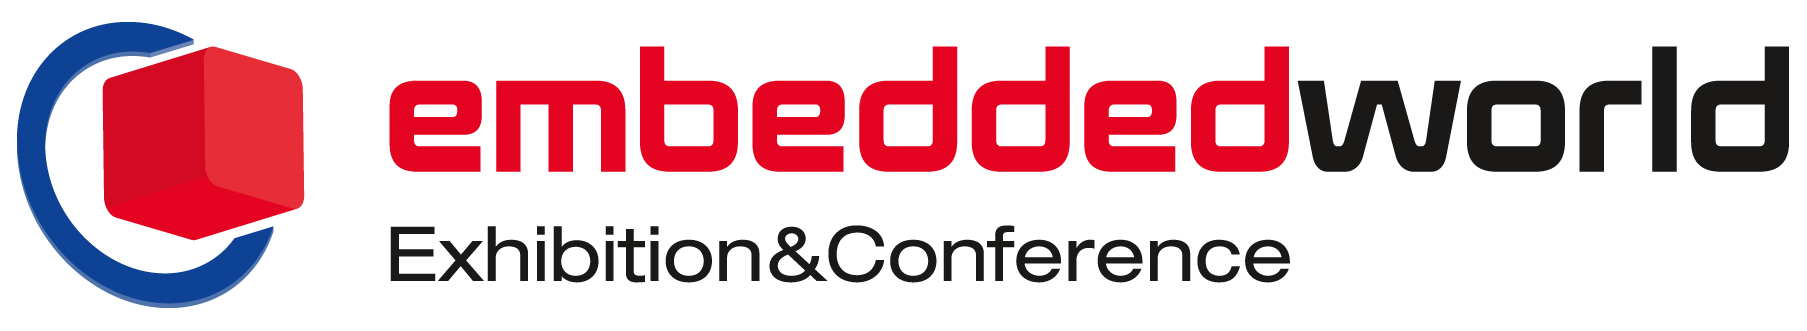 Embedded World Exhibition & Conference